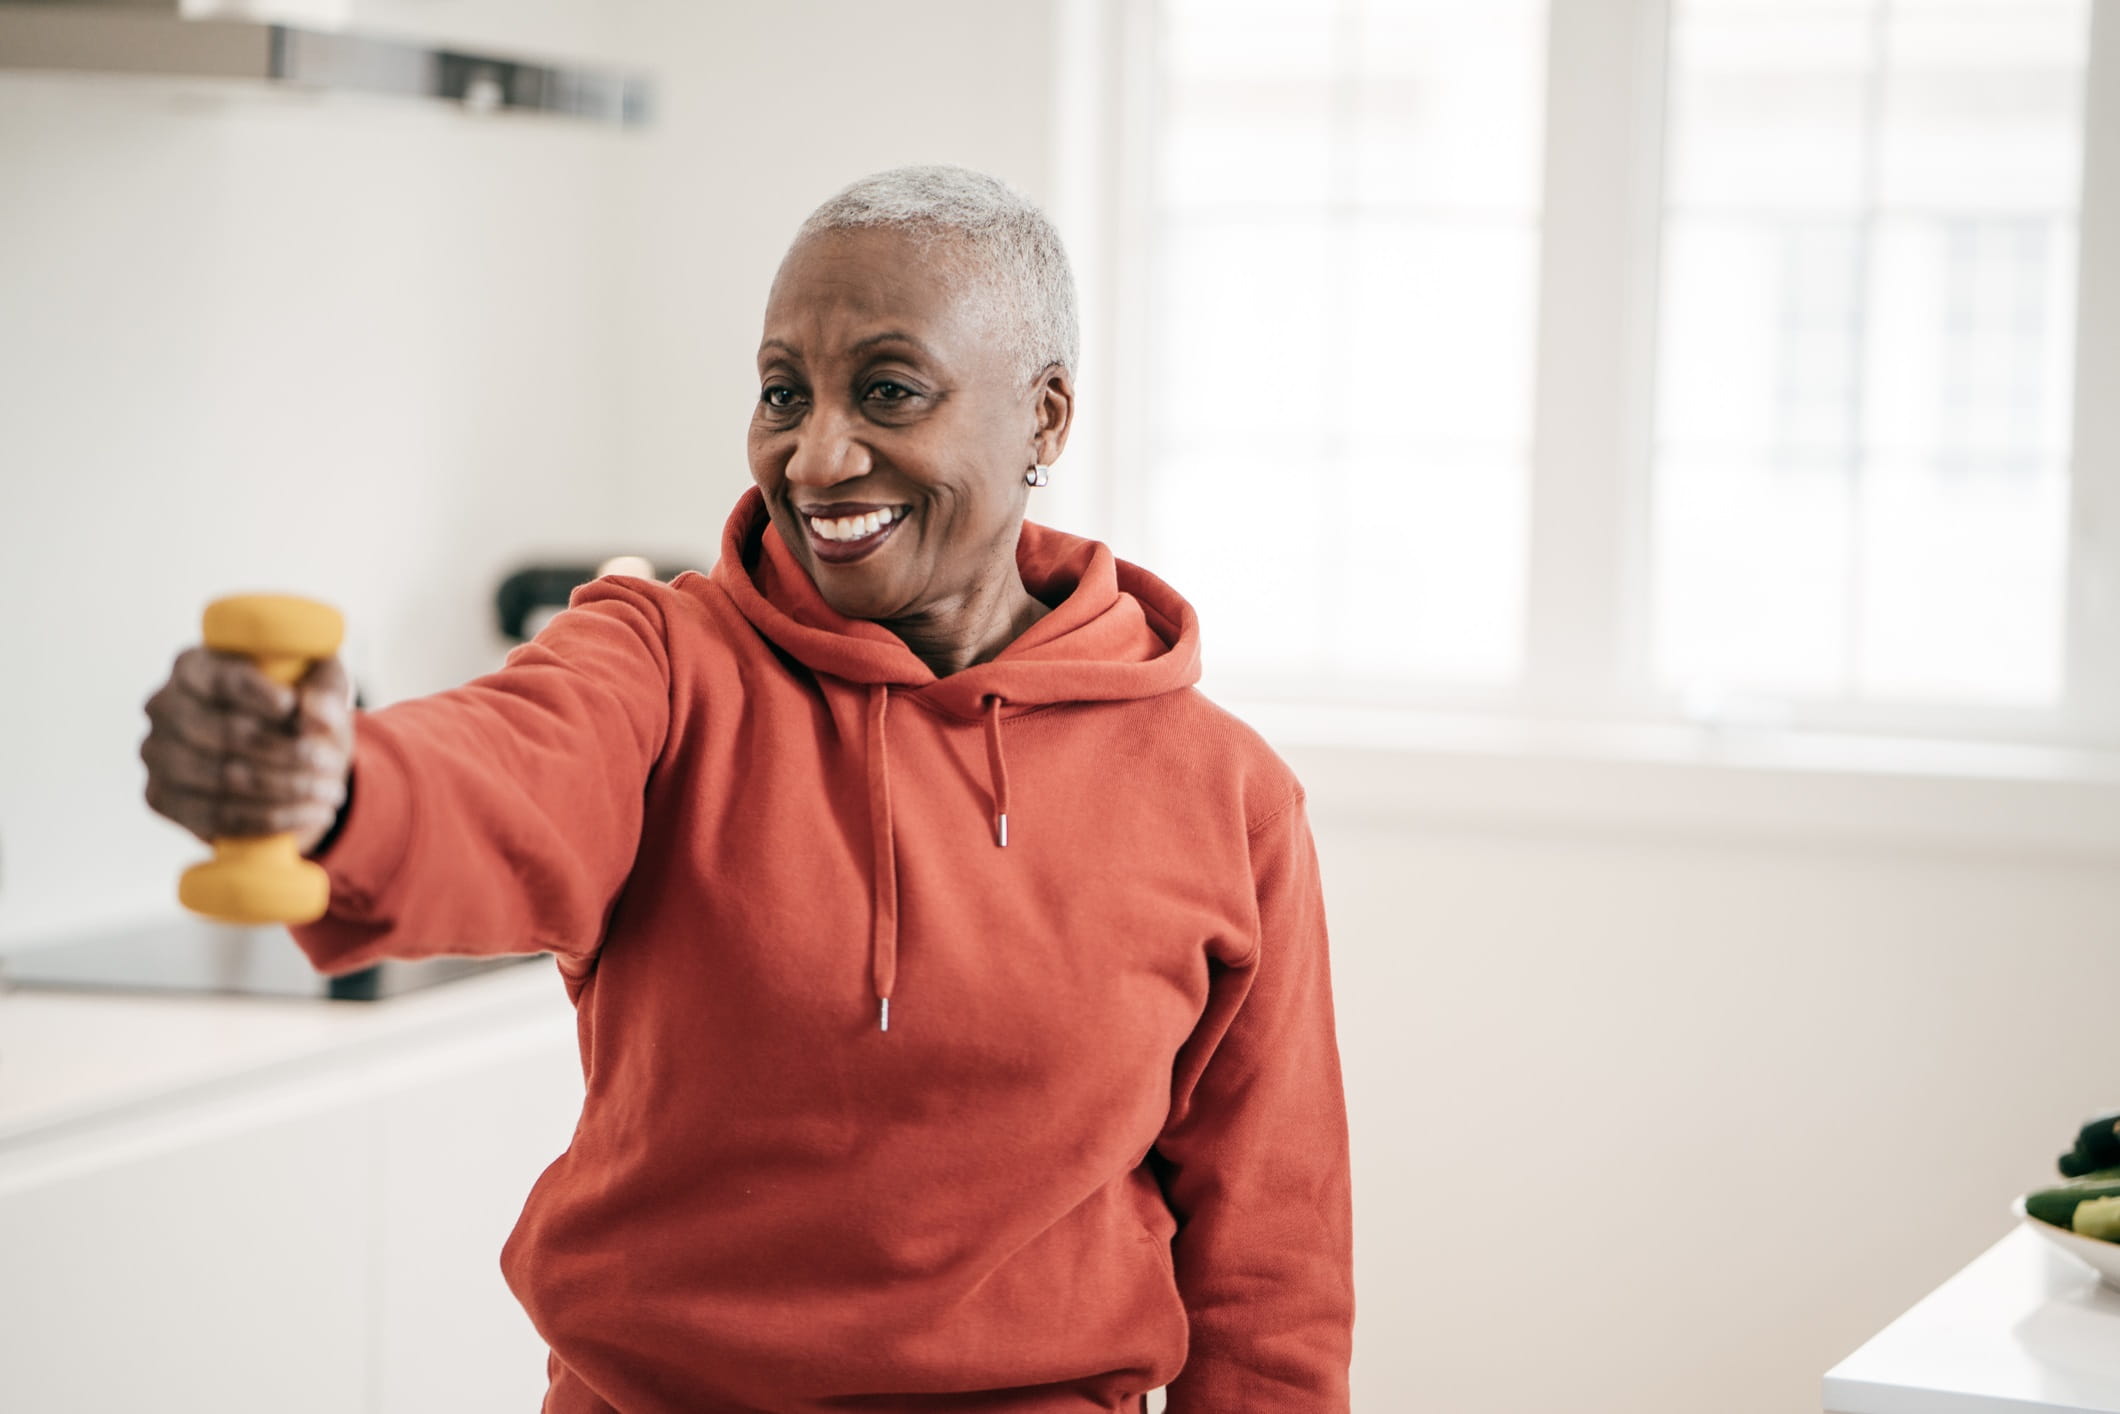 Senior women taking care of herself she exercise with dumbbells at home